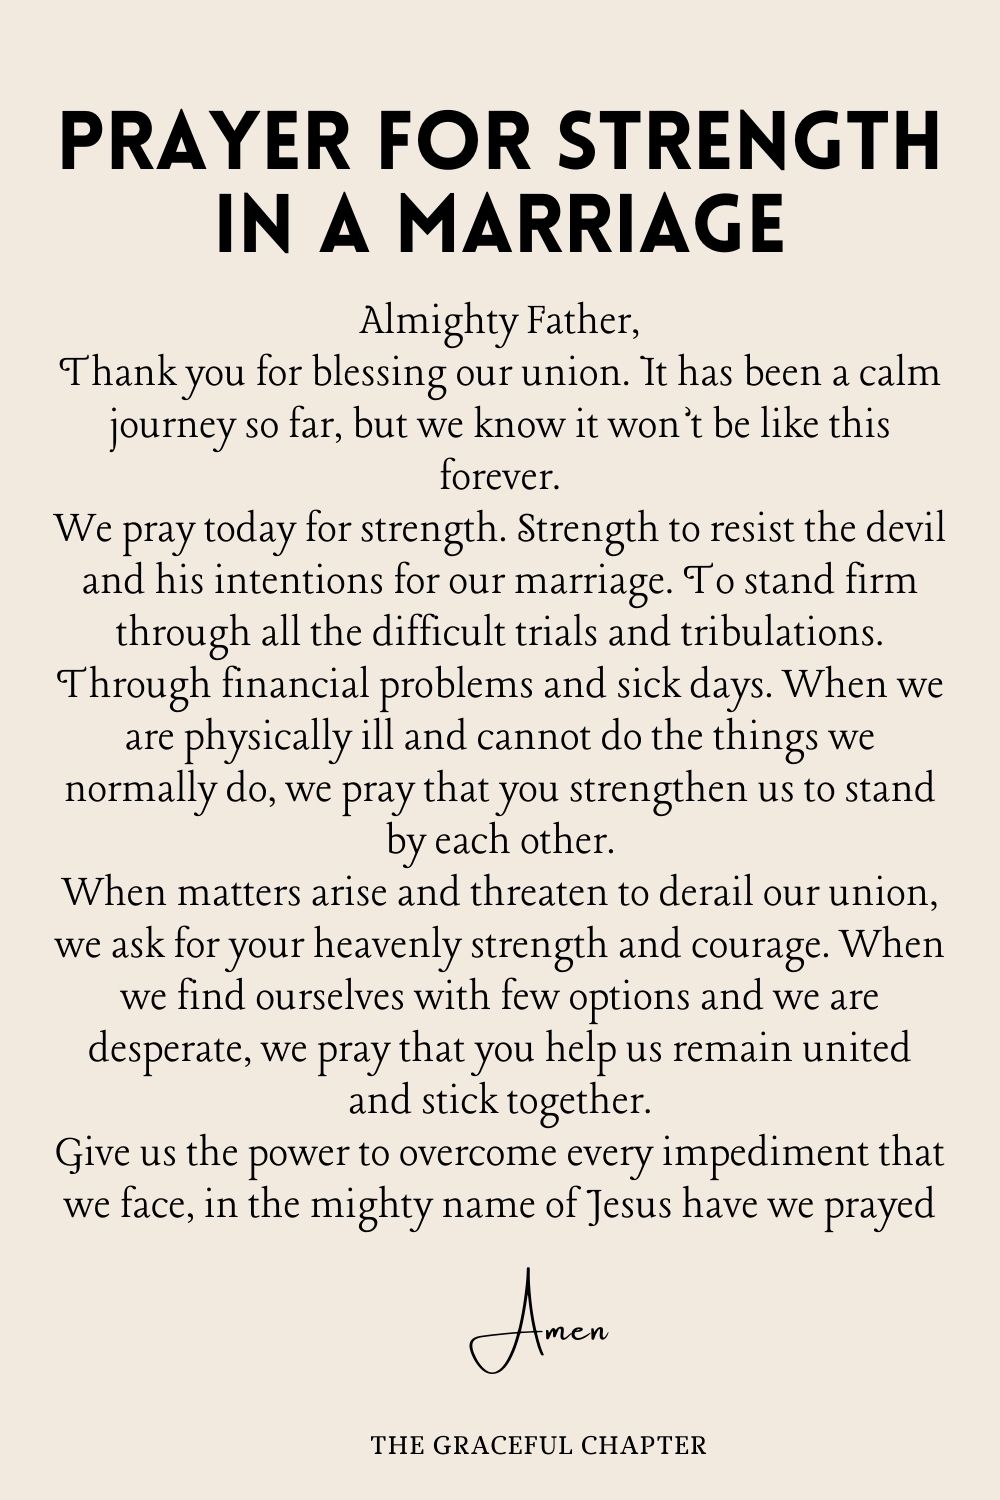 Prayer for Strength in a Marriage